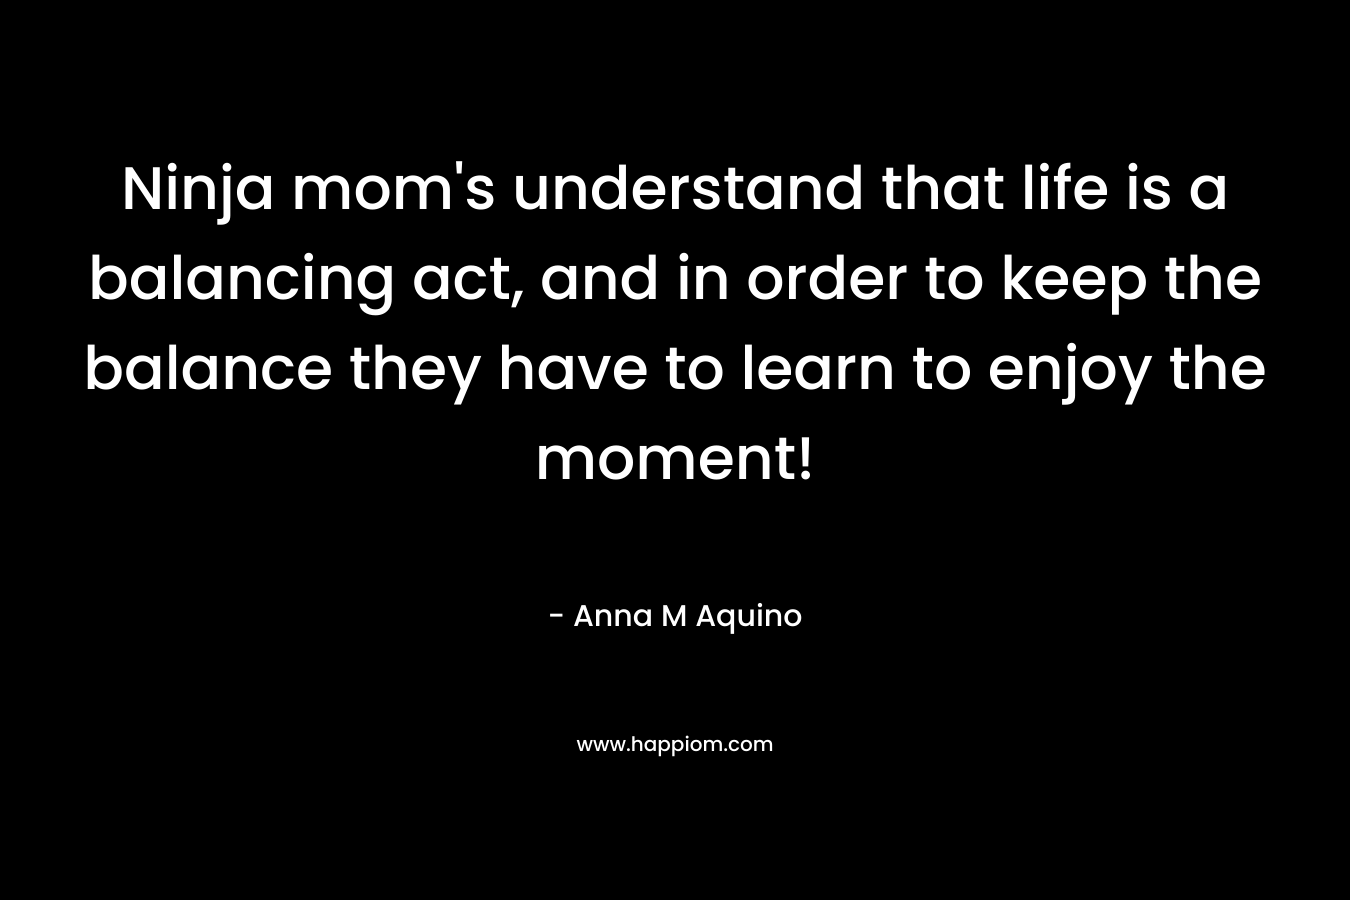 Ninja mom's understand that life is a balancing act, and in order to keep the balance they have to learn to enjoy the moment!